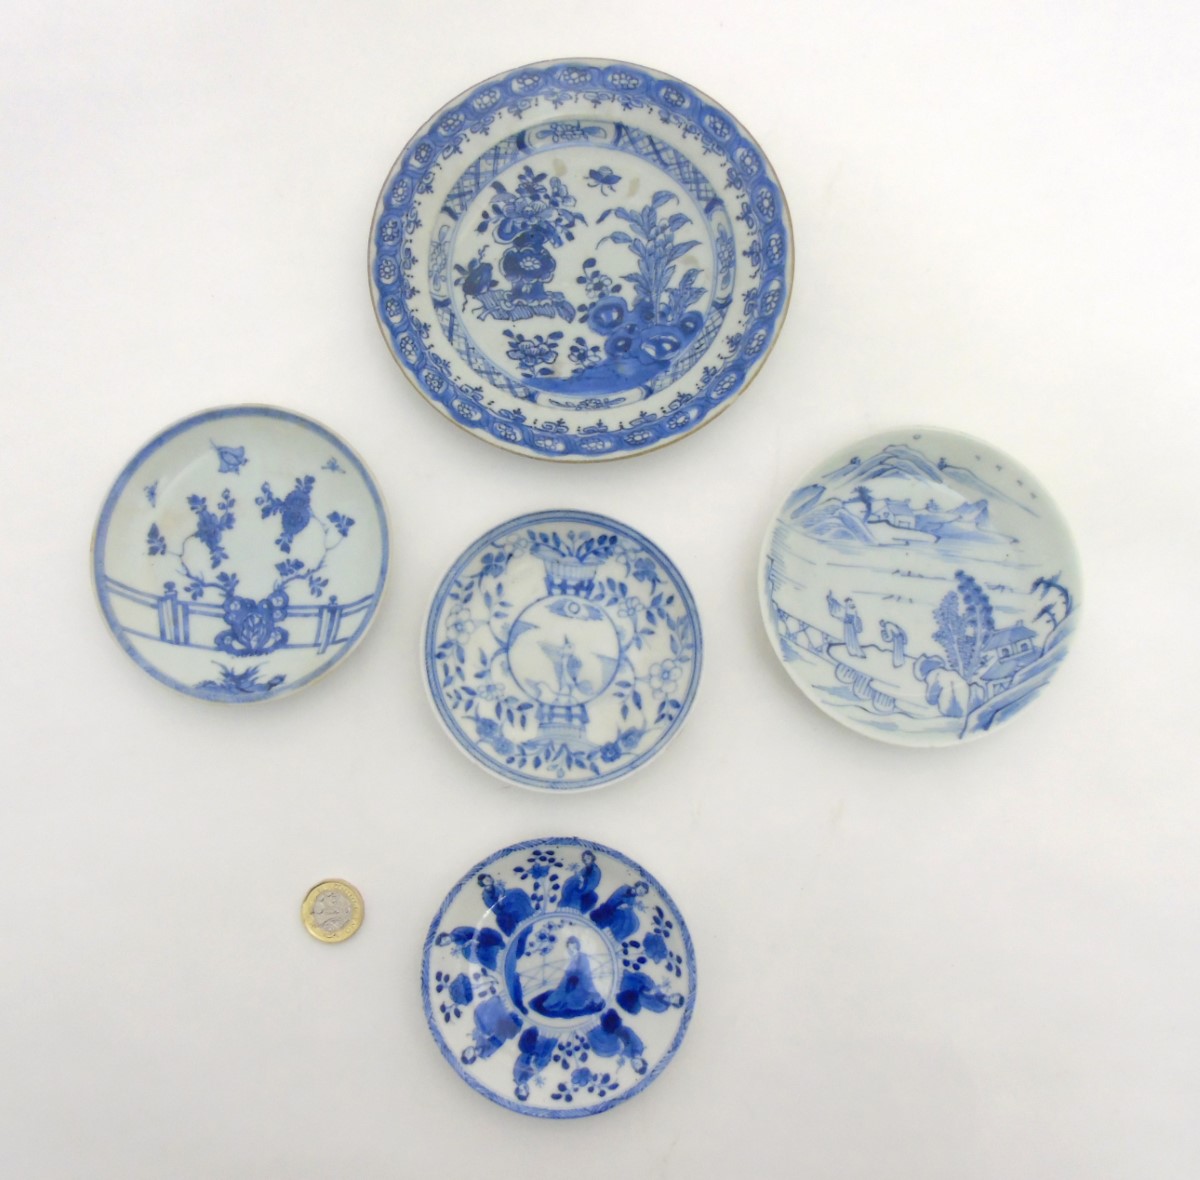 Five Chinese blue and white plates: A blue and white plate depicting butterflies and peonies on a - Image 5 of 15